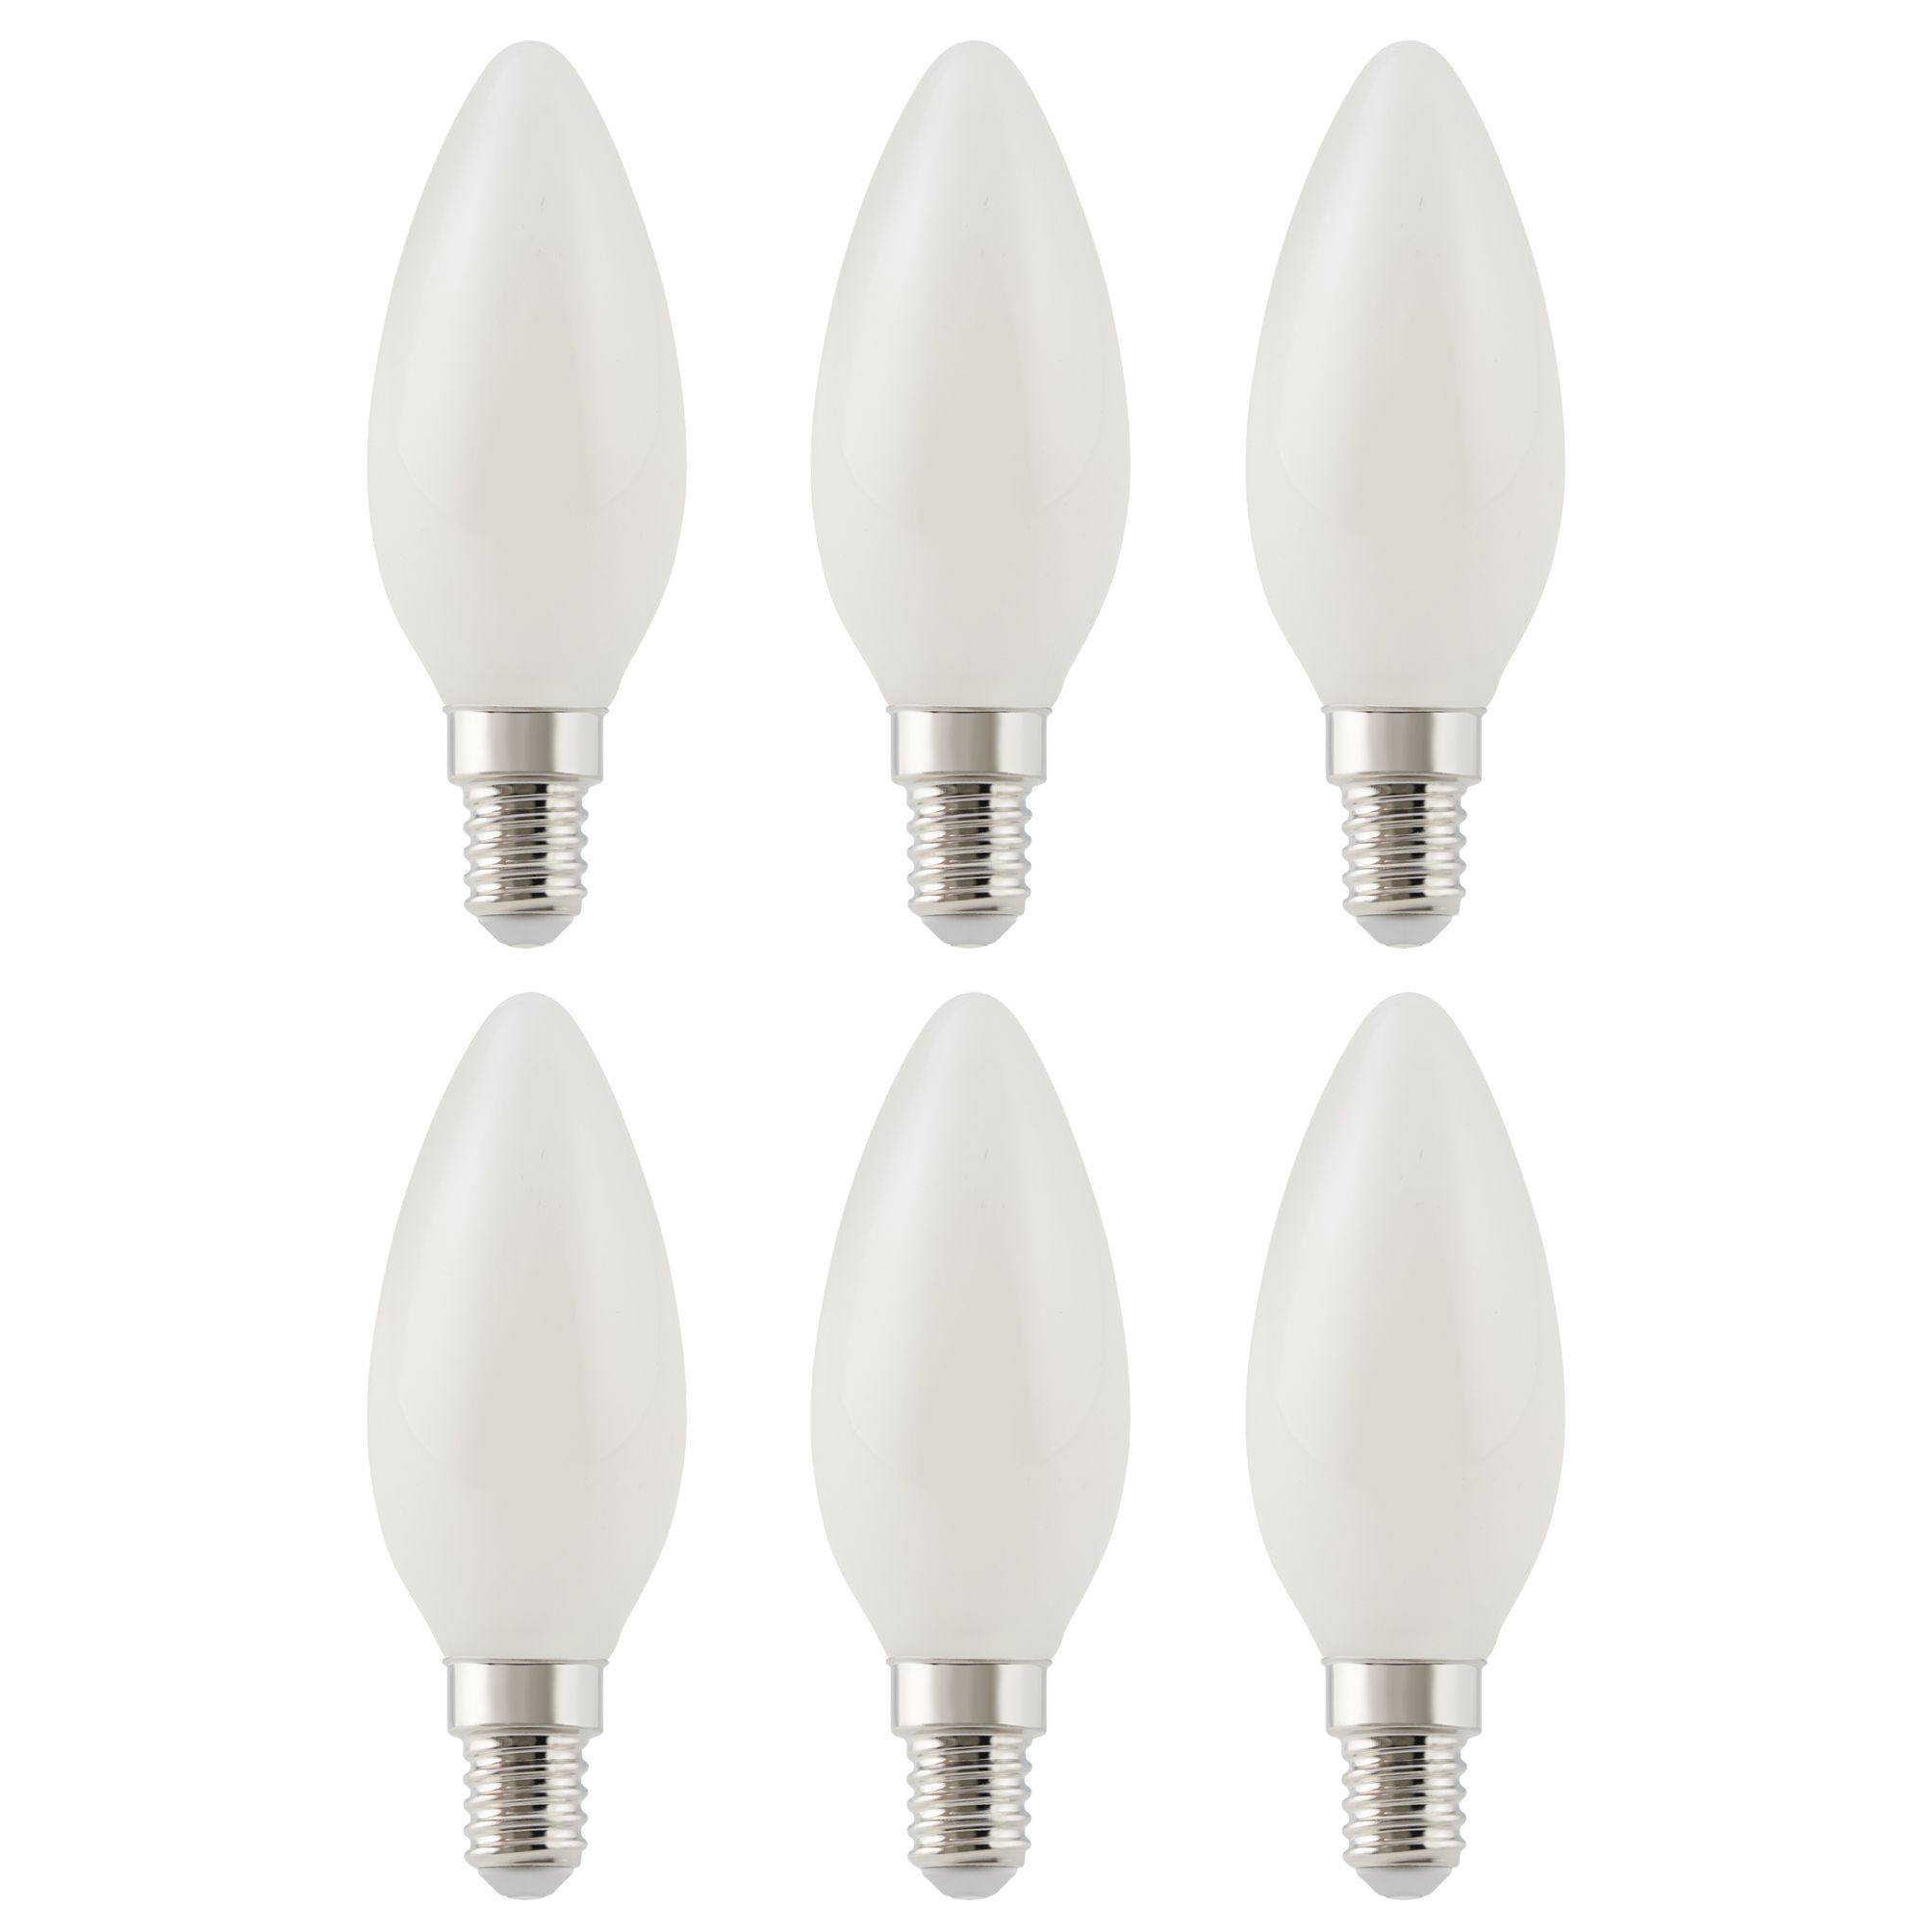 Diall 1.8W 250lm Milky Candle Warm white LED filament Light bulb, Pack of 6